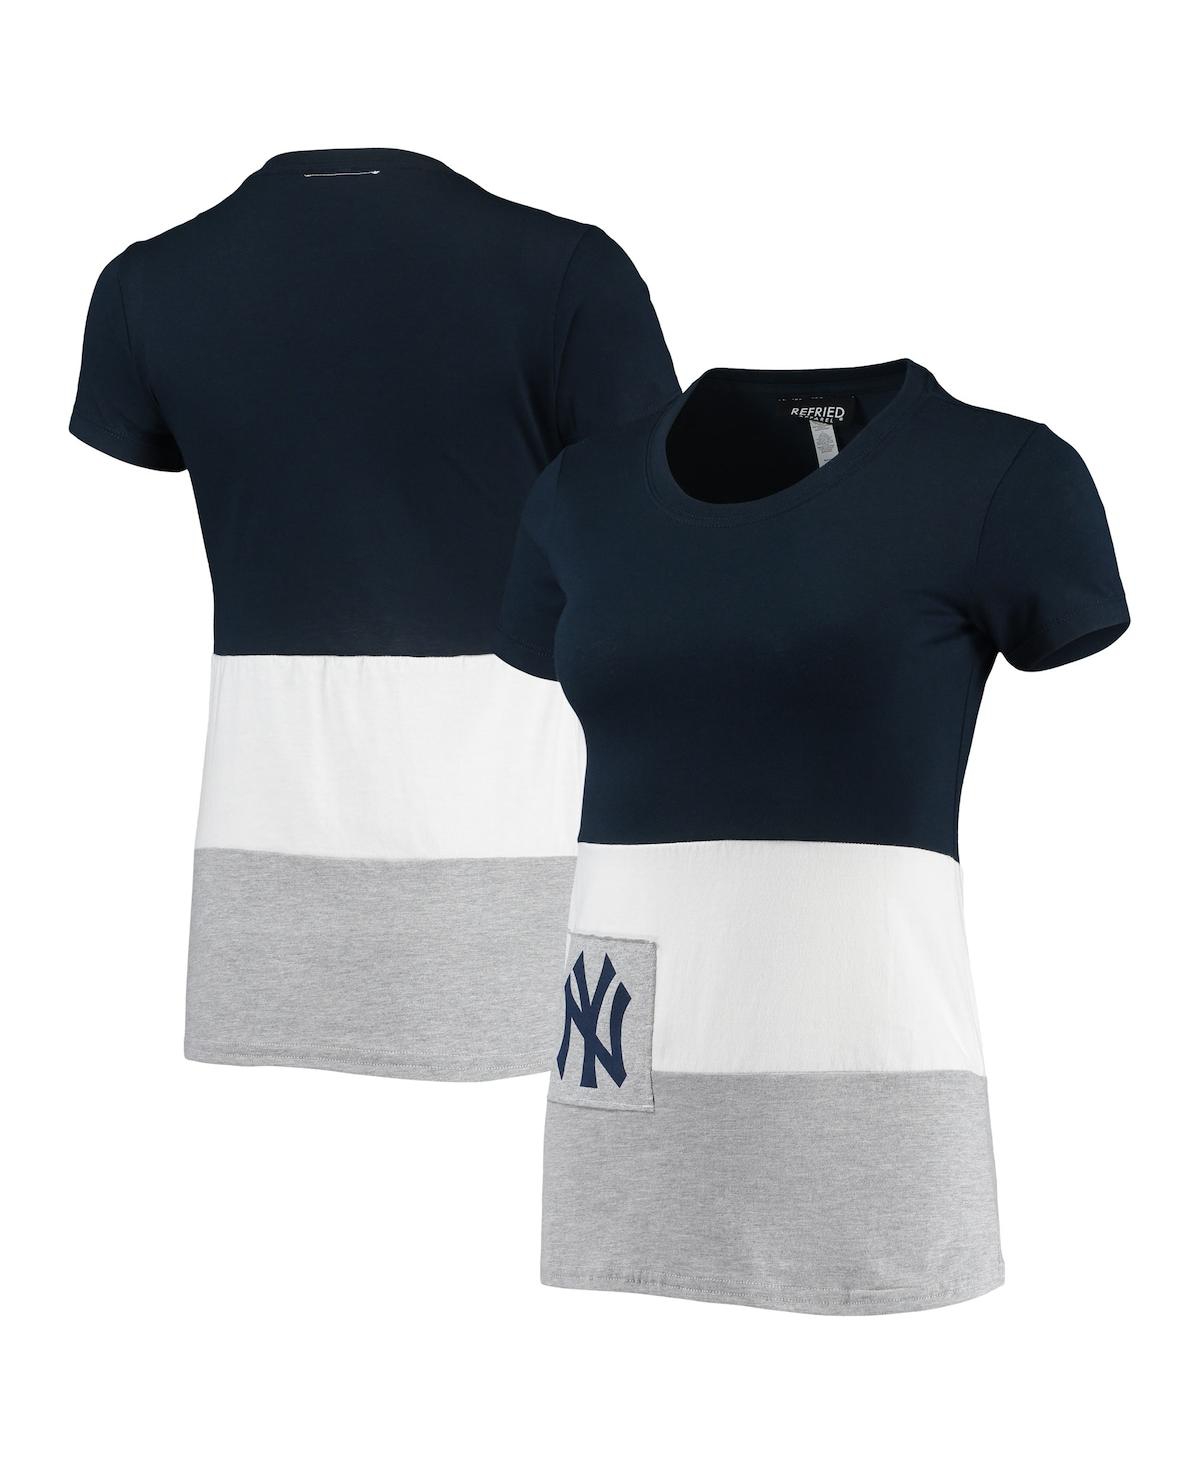 Women's Refried Apparel Navy New York Yankees Fitted T-shirt - Navy